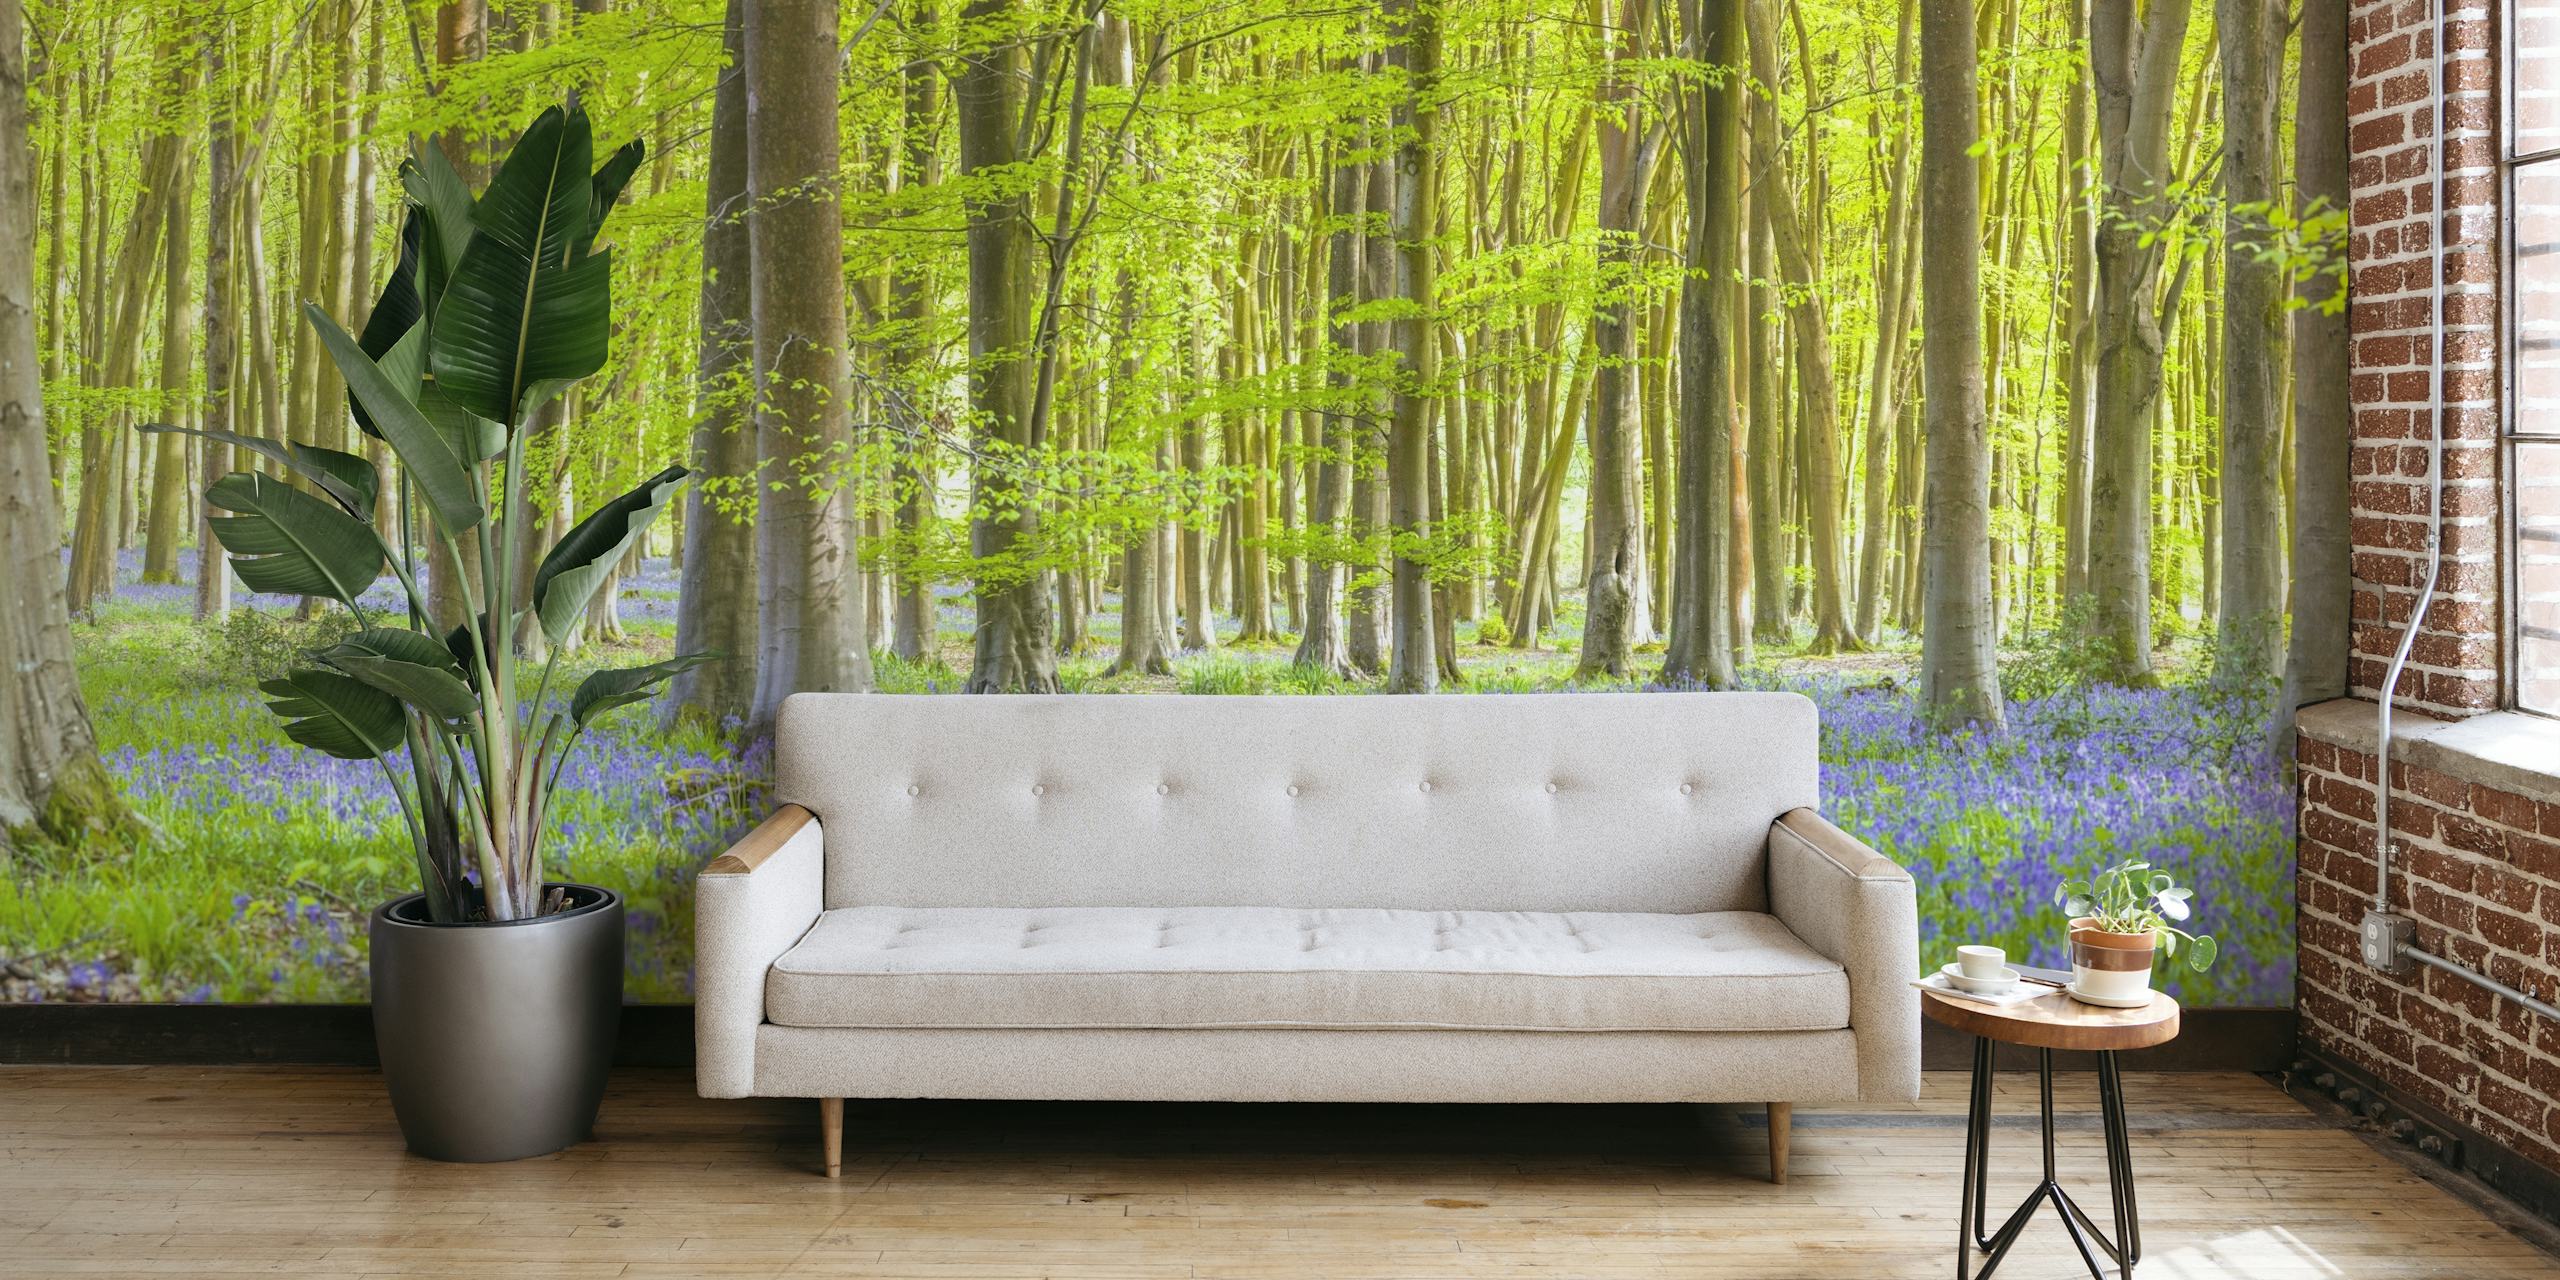 Green Forest Wallpaper - Buy Now on Happywall